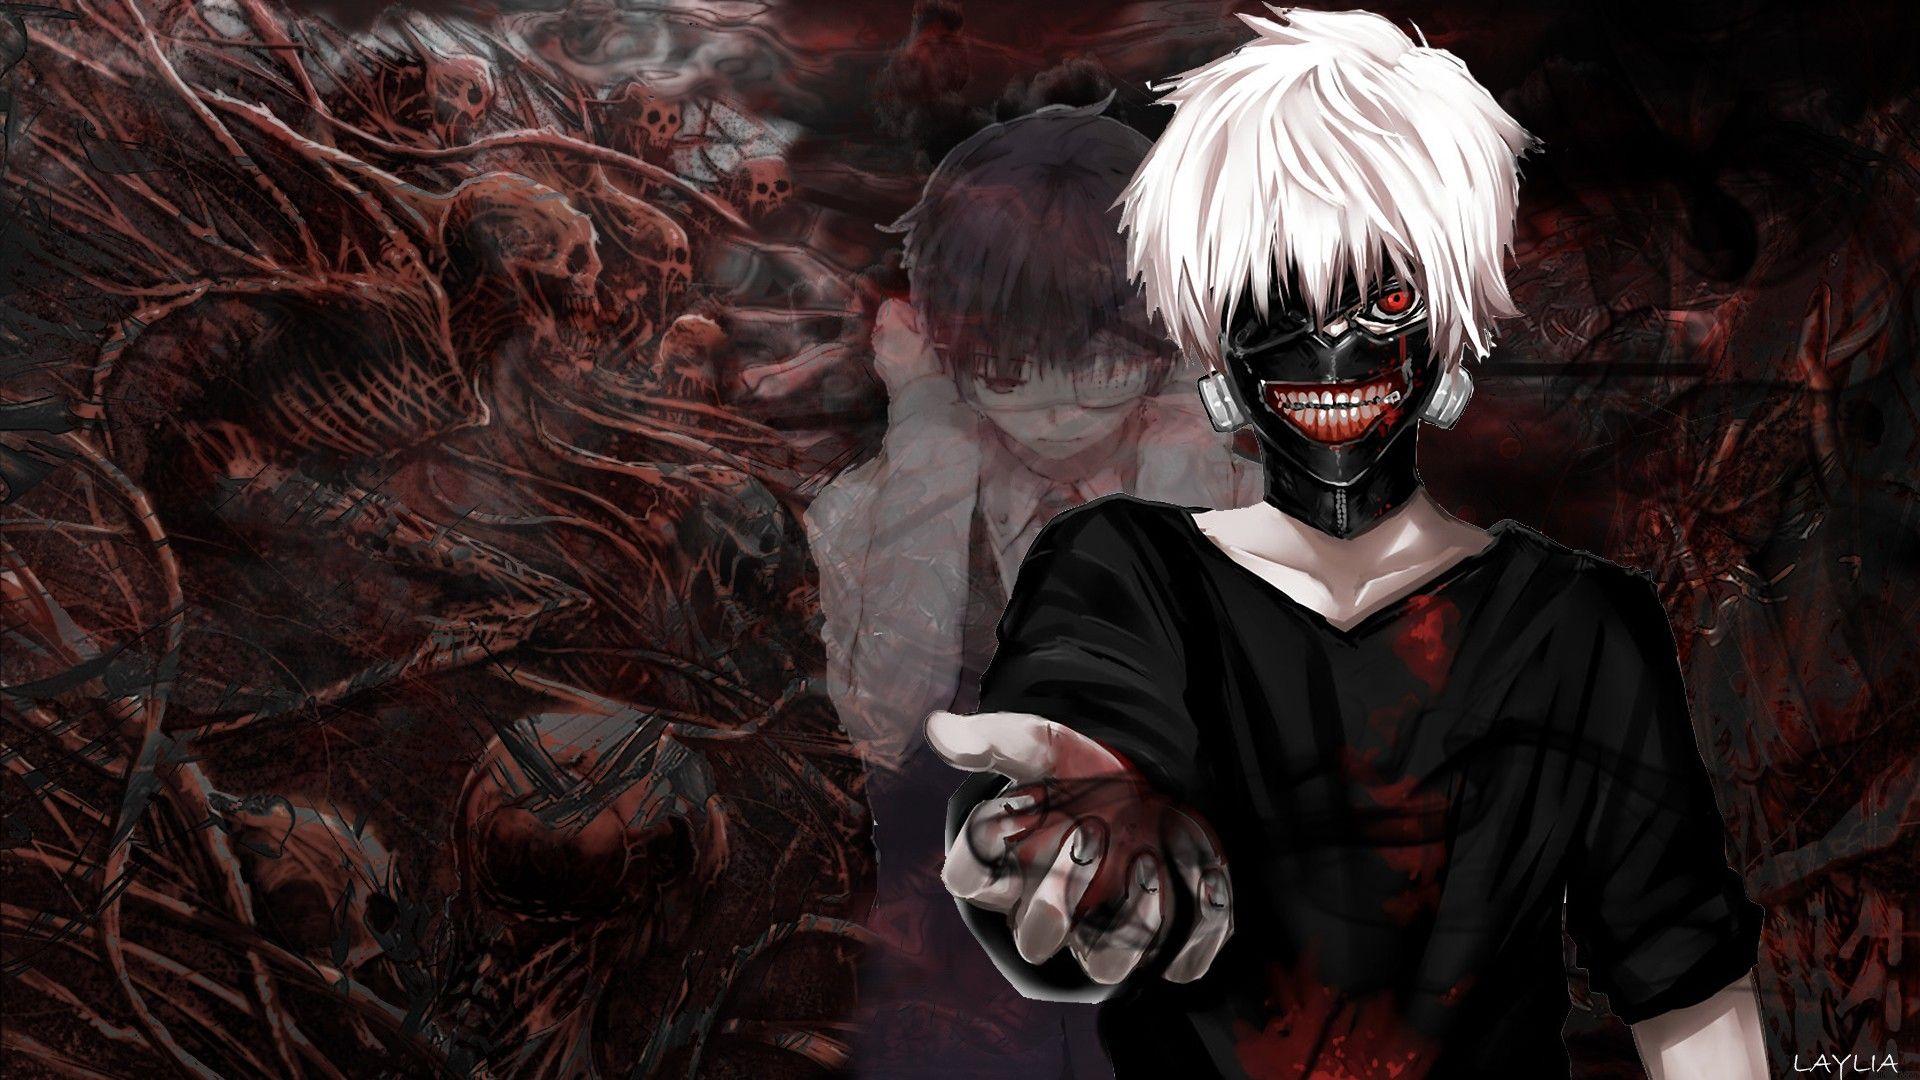 Tokyo Ghoul wallpapers HD ·① Download free cool backgrounds for